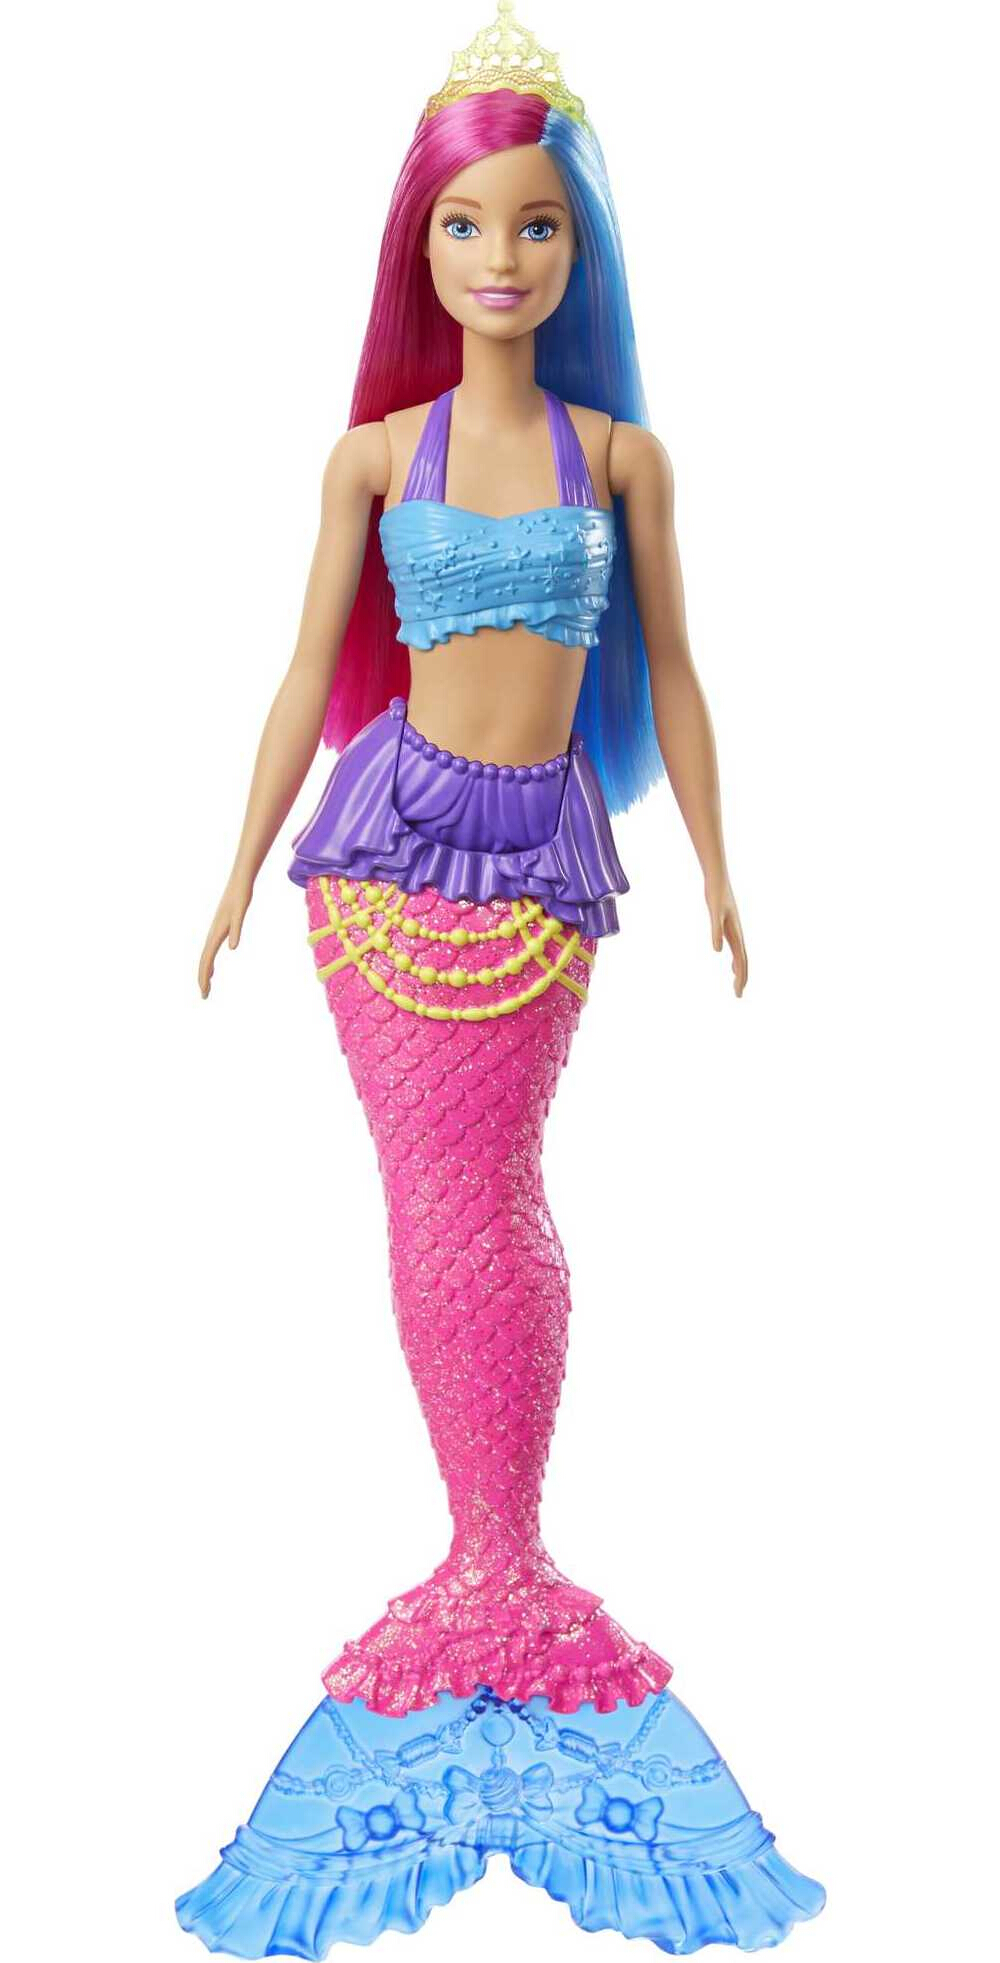 Barbie Dreamtopia Mermaid Doll with Pink & Blue Hair & Tail, Plus Tiara Accessory - image 1 of 6